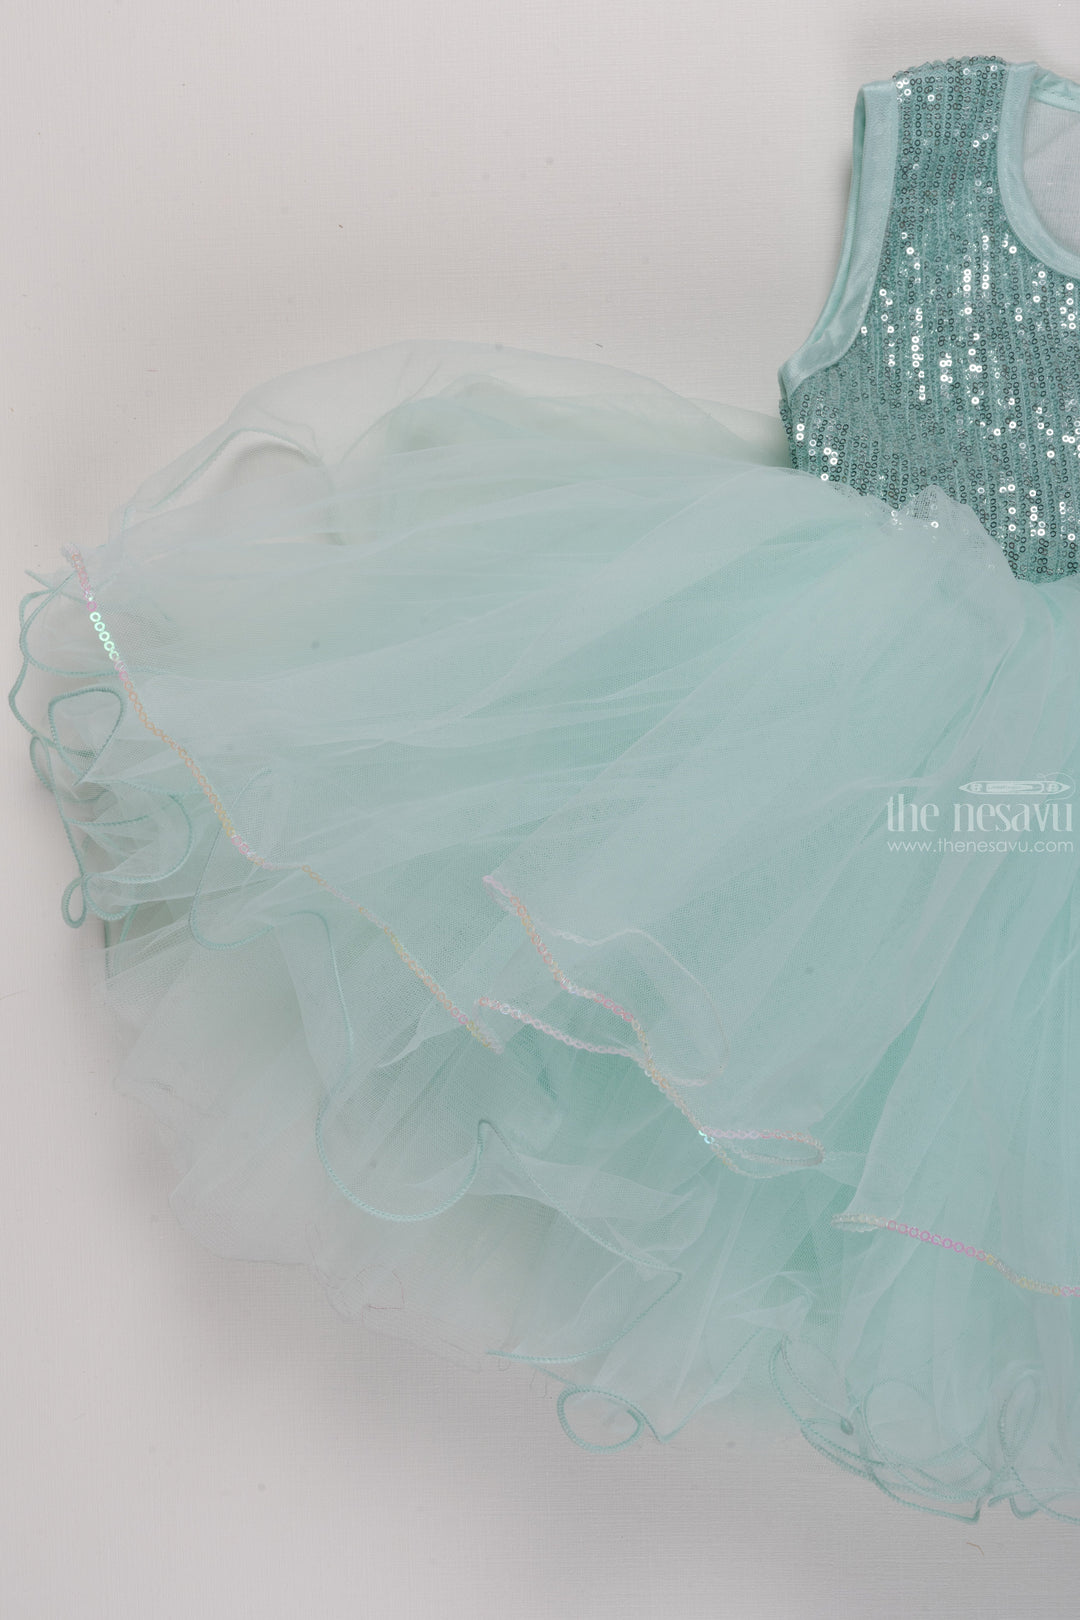 The Nesavu Girls Tutu Frock Girls Turquoise Tulle Dress with Glistening Sequin Embroidery Nesavu Girls Sequin and Tulle Party Dresses | Glamorous and Cute | The Nesavu